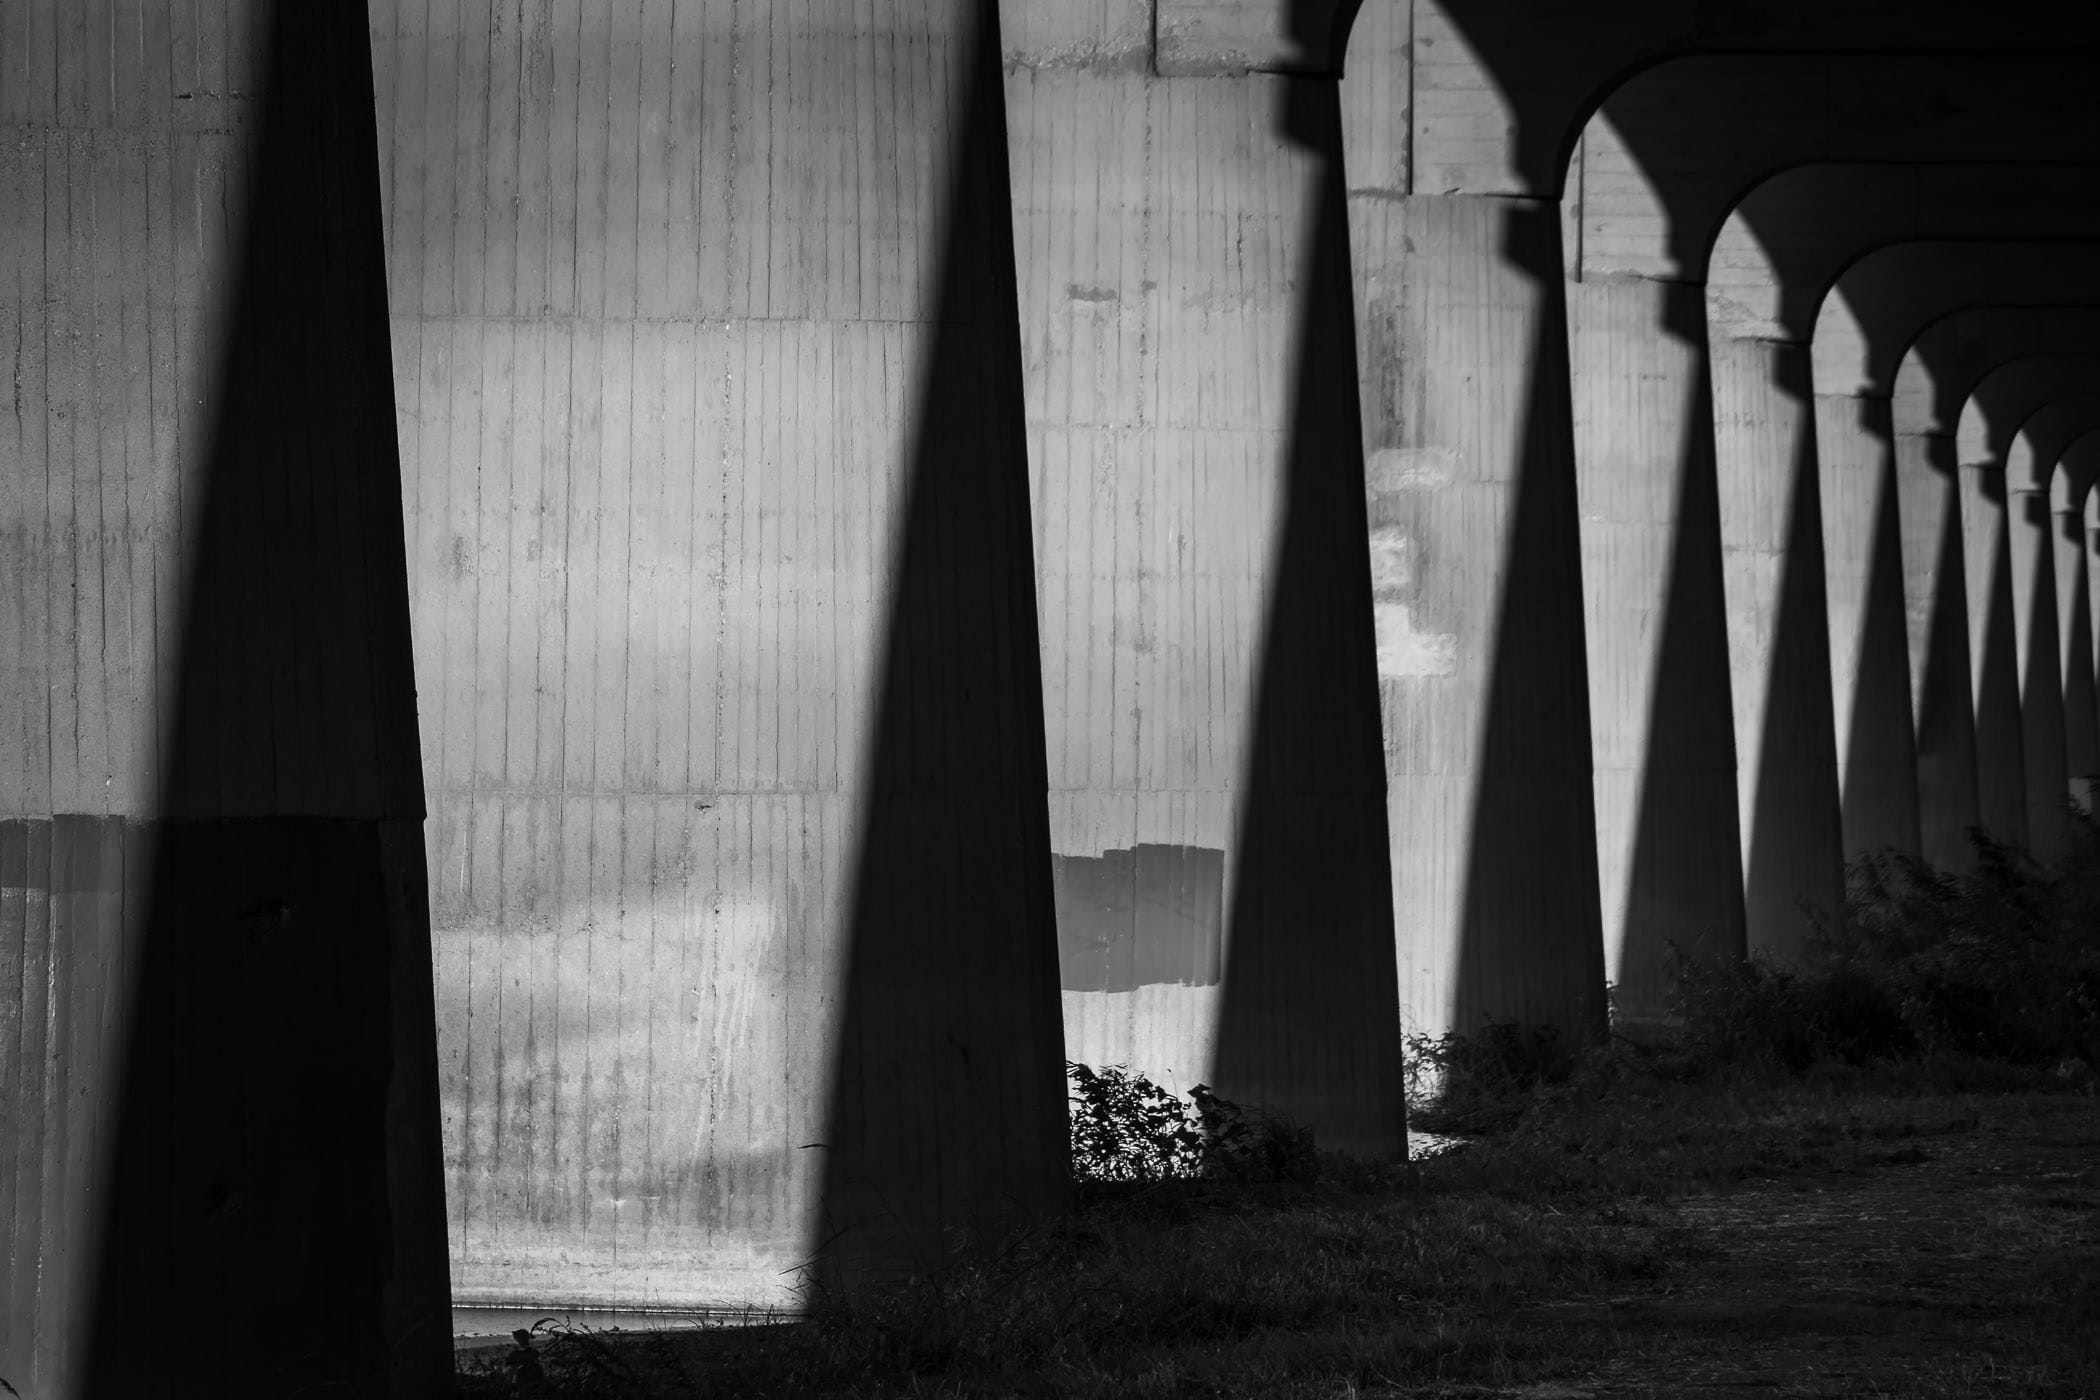 Shadows fall on the supports for the Commerce Street Viaduct, Dallas, Texas.